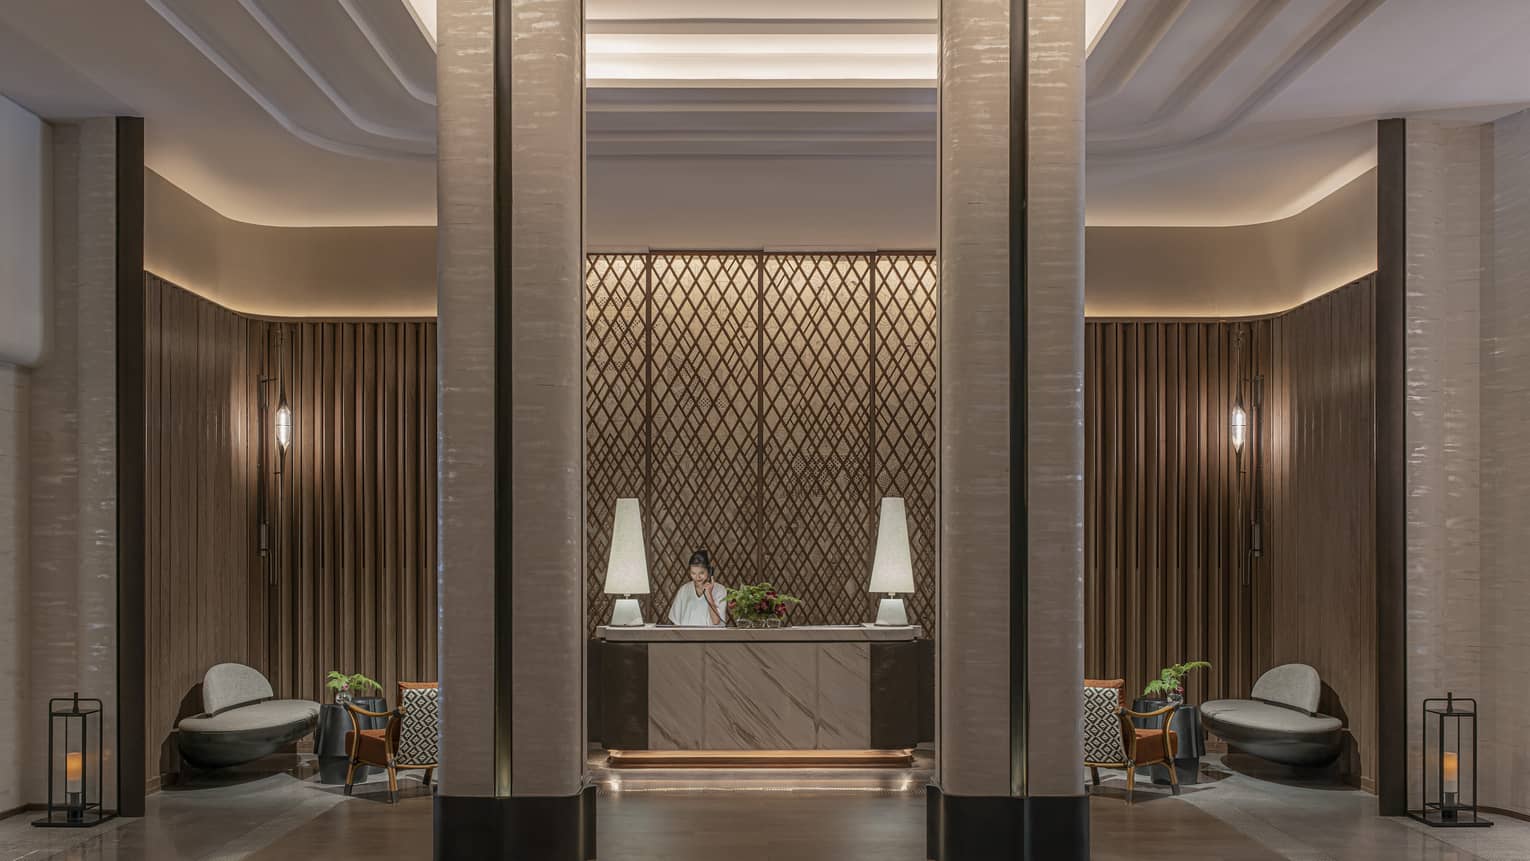 Spa lobby with floor-to-ceiling columns, lighted wall sconces and reception desk